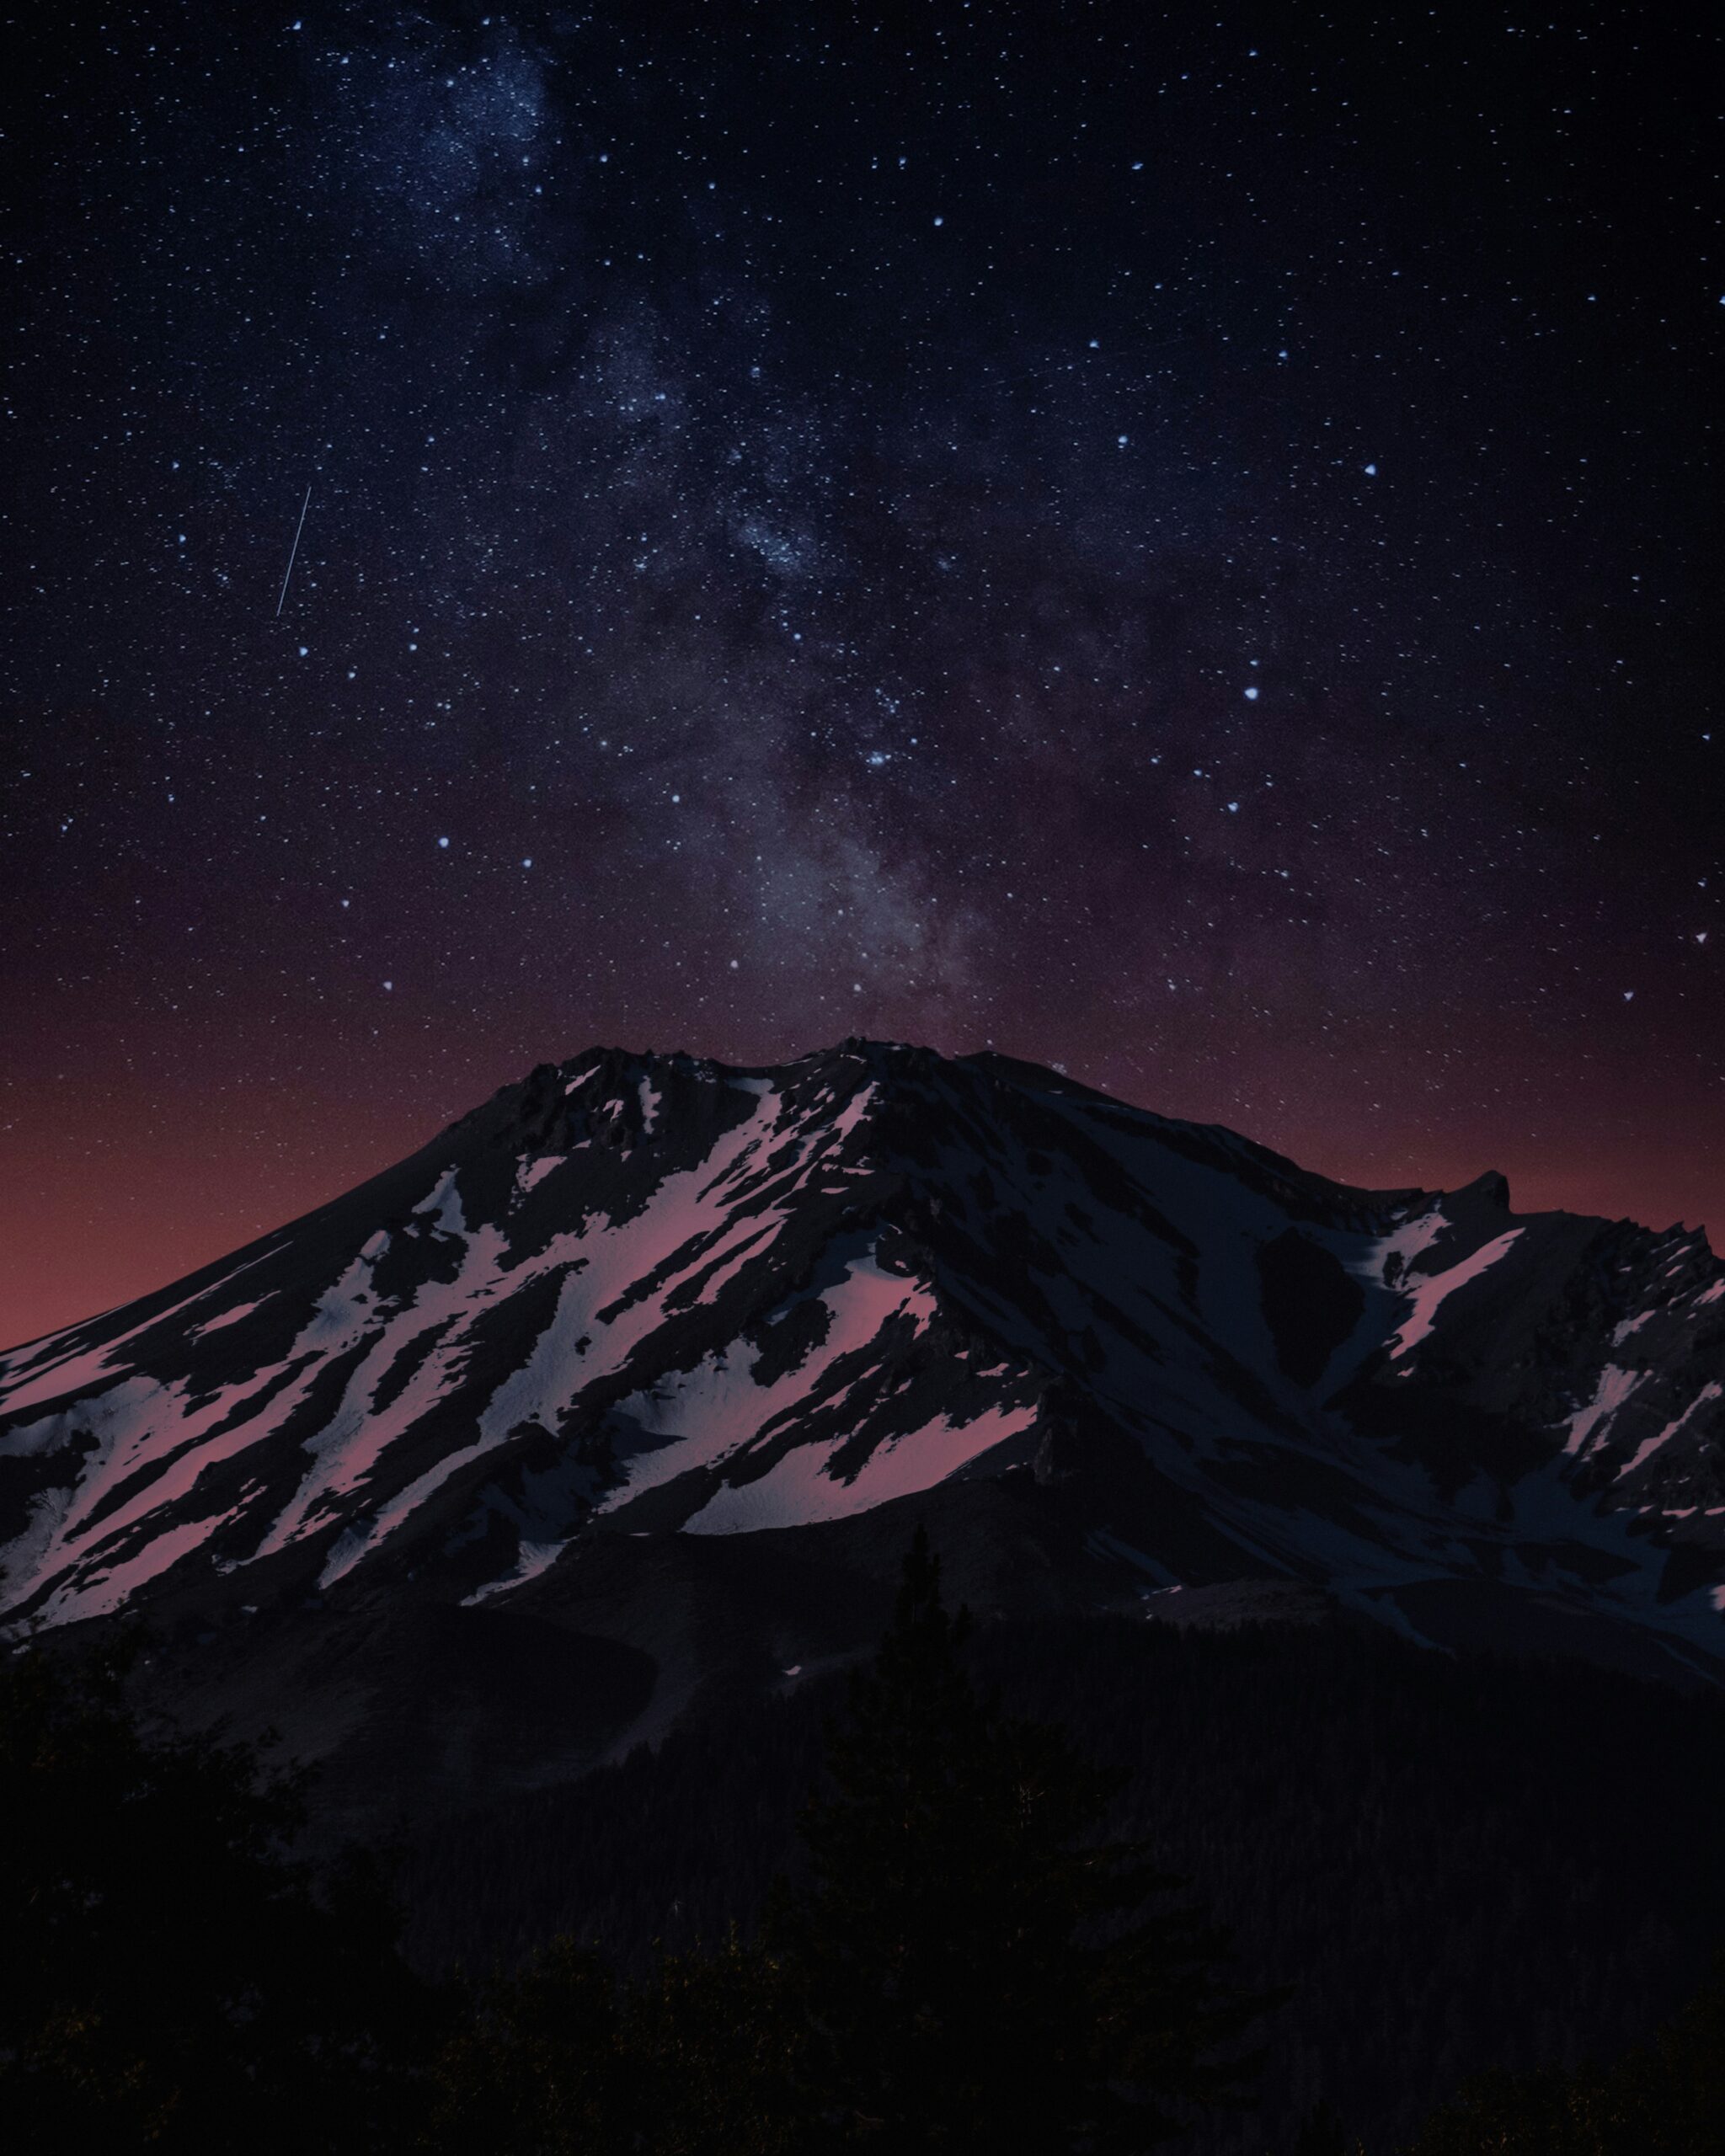 What Are The Closest Towns To Mount Shasta For Hiking?